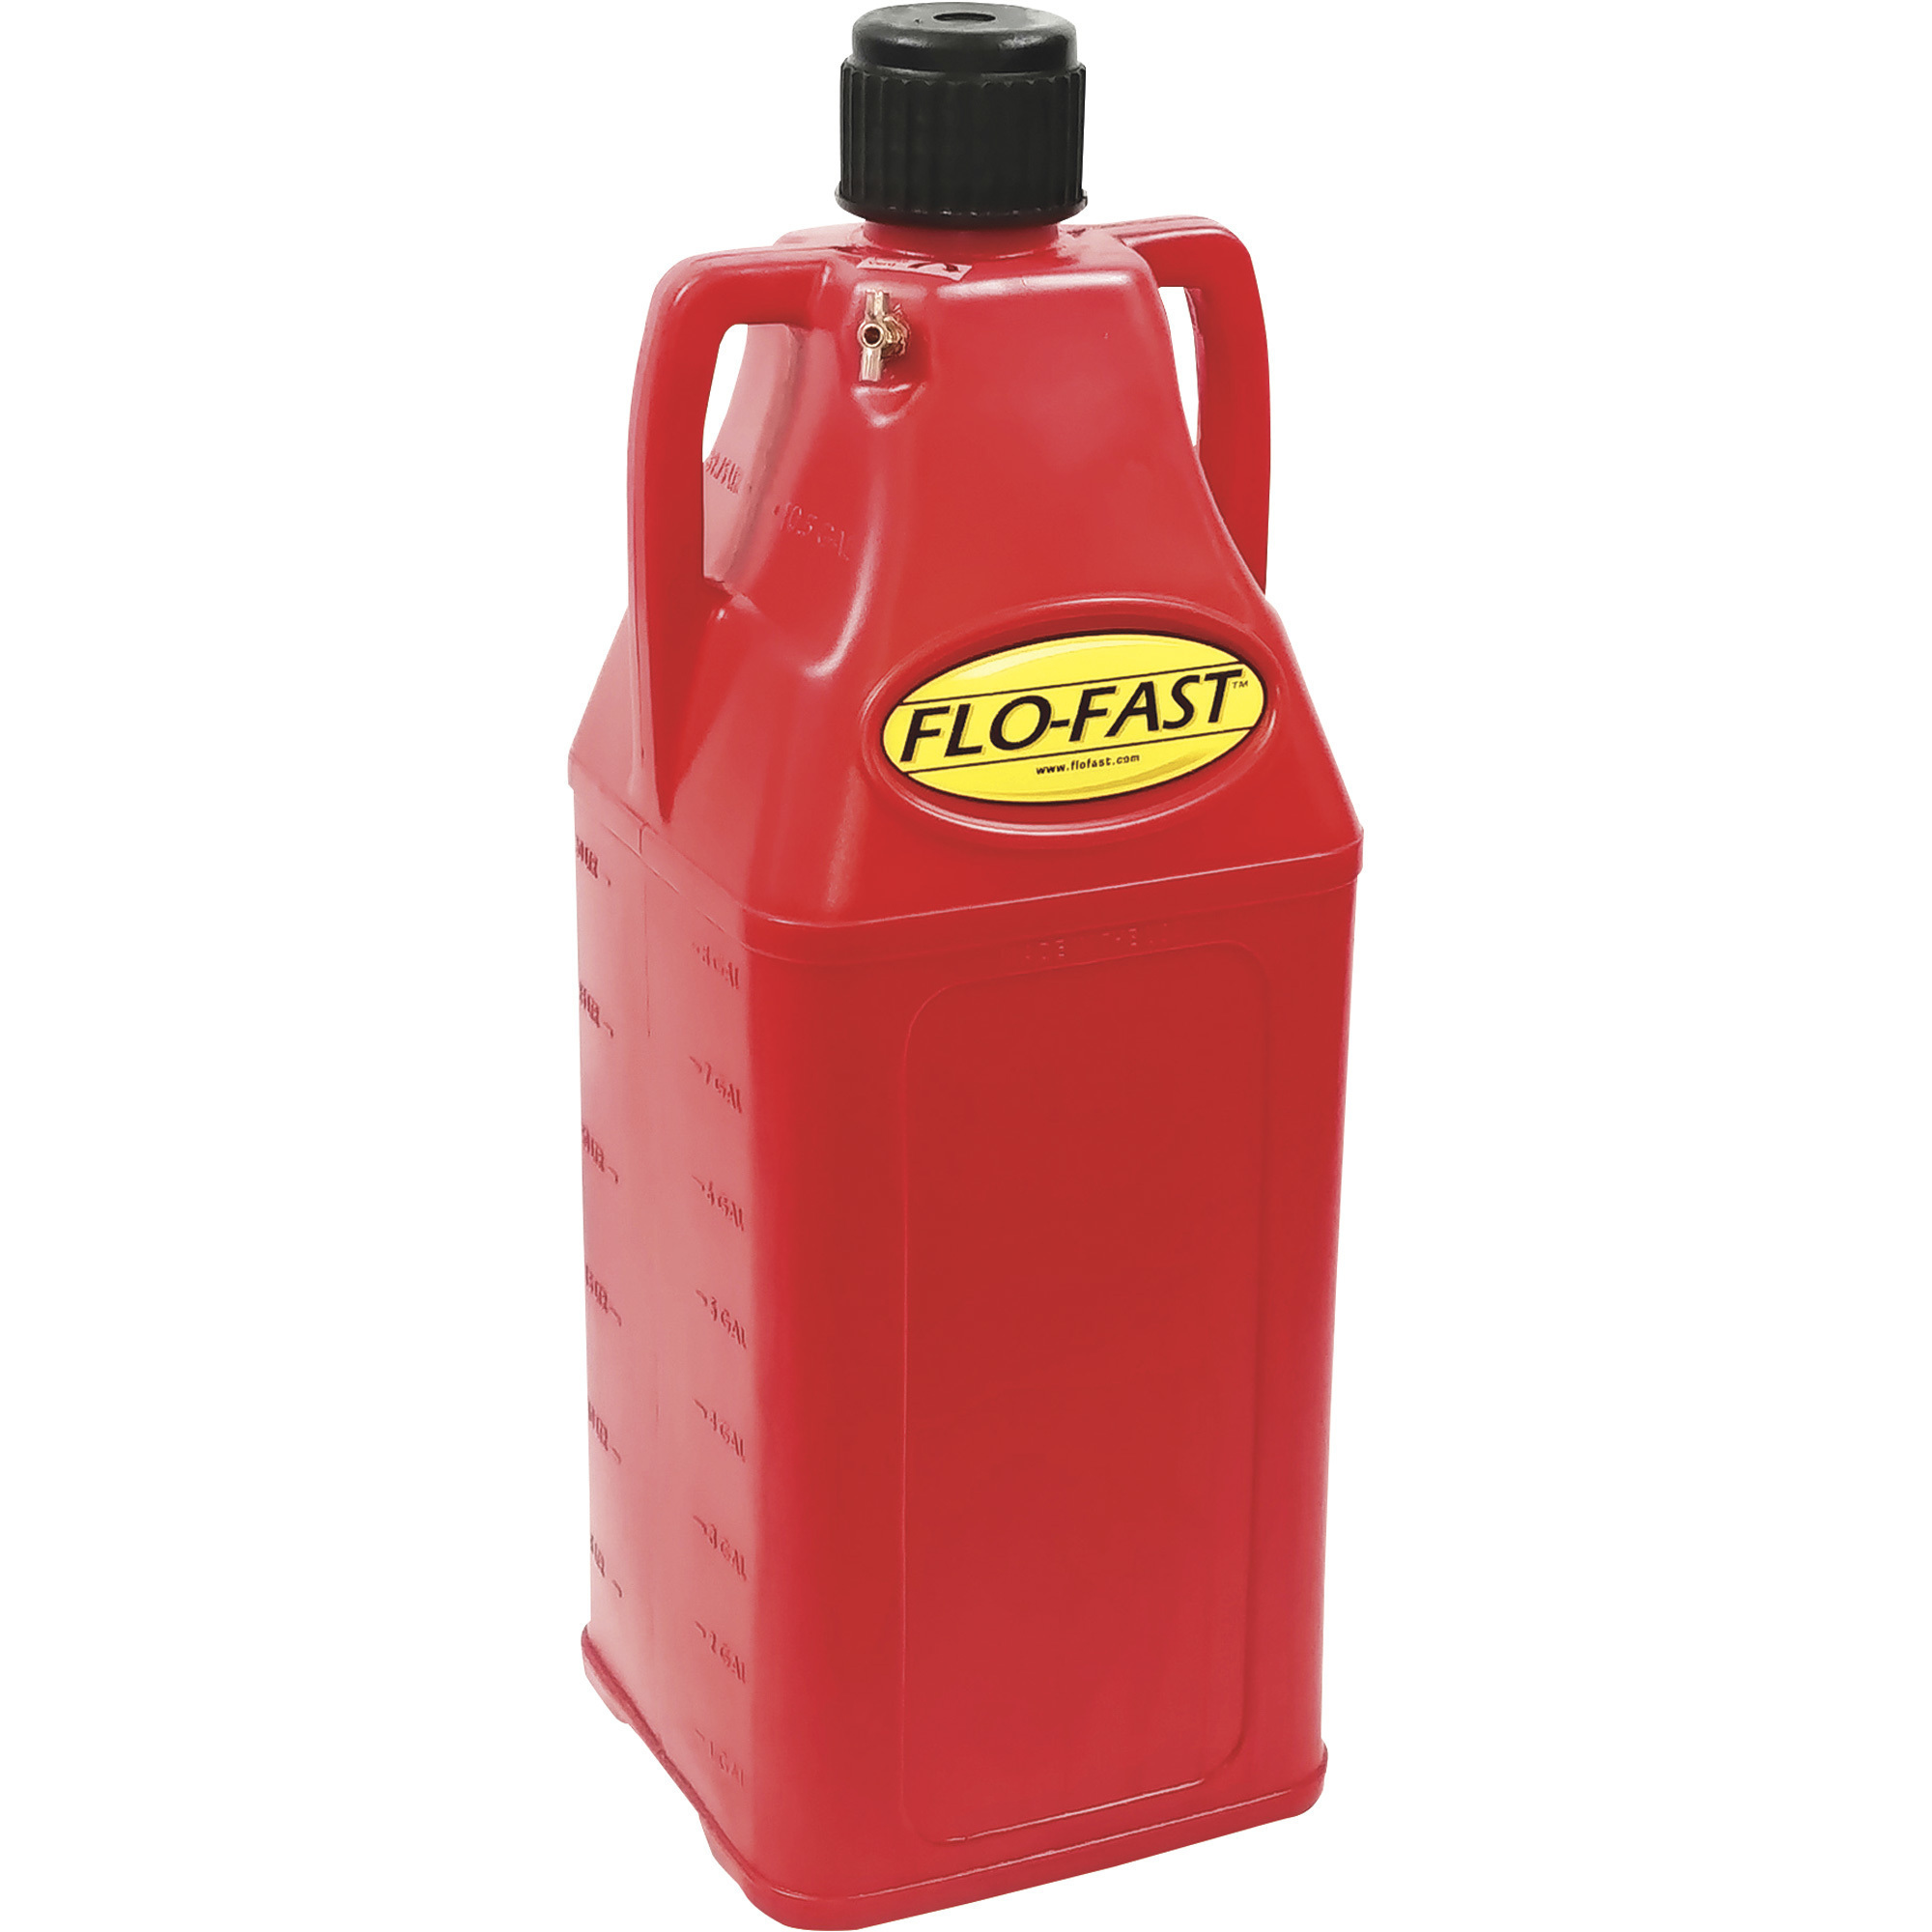 FLO-FAST Container, 10.5-Gallon, Red, For Gasoline, Model 10501